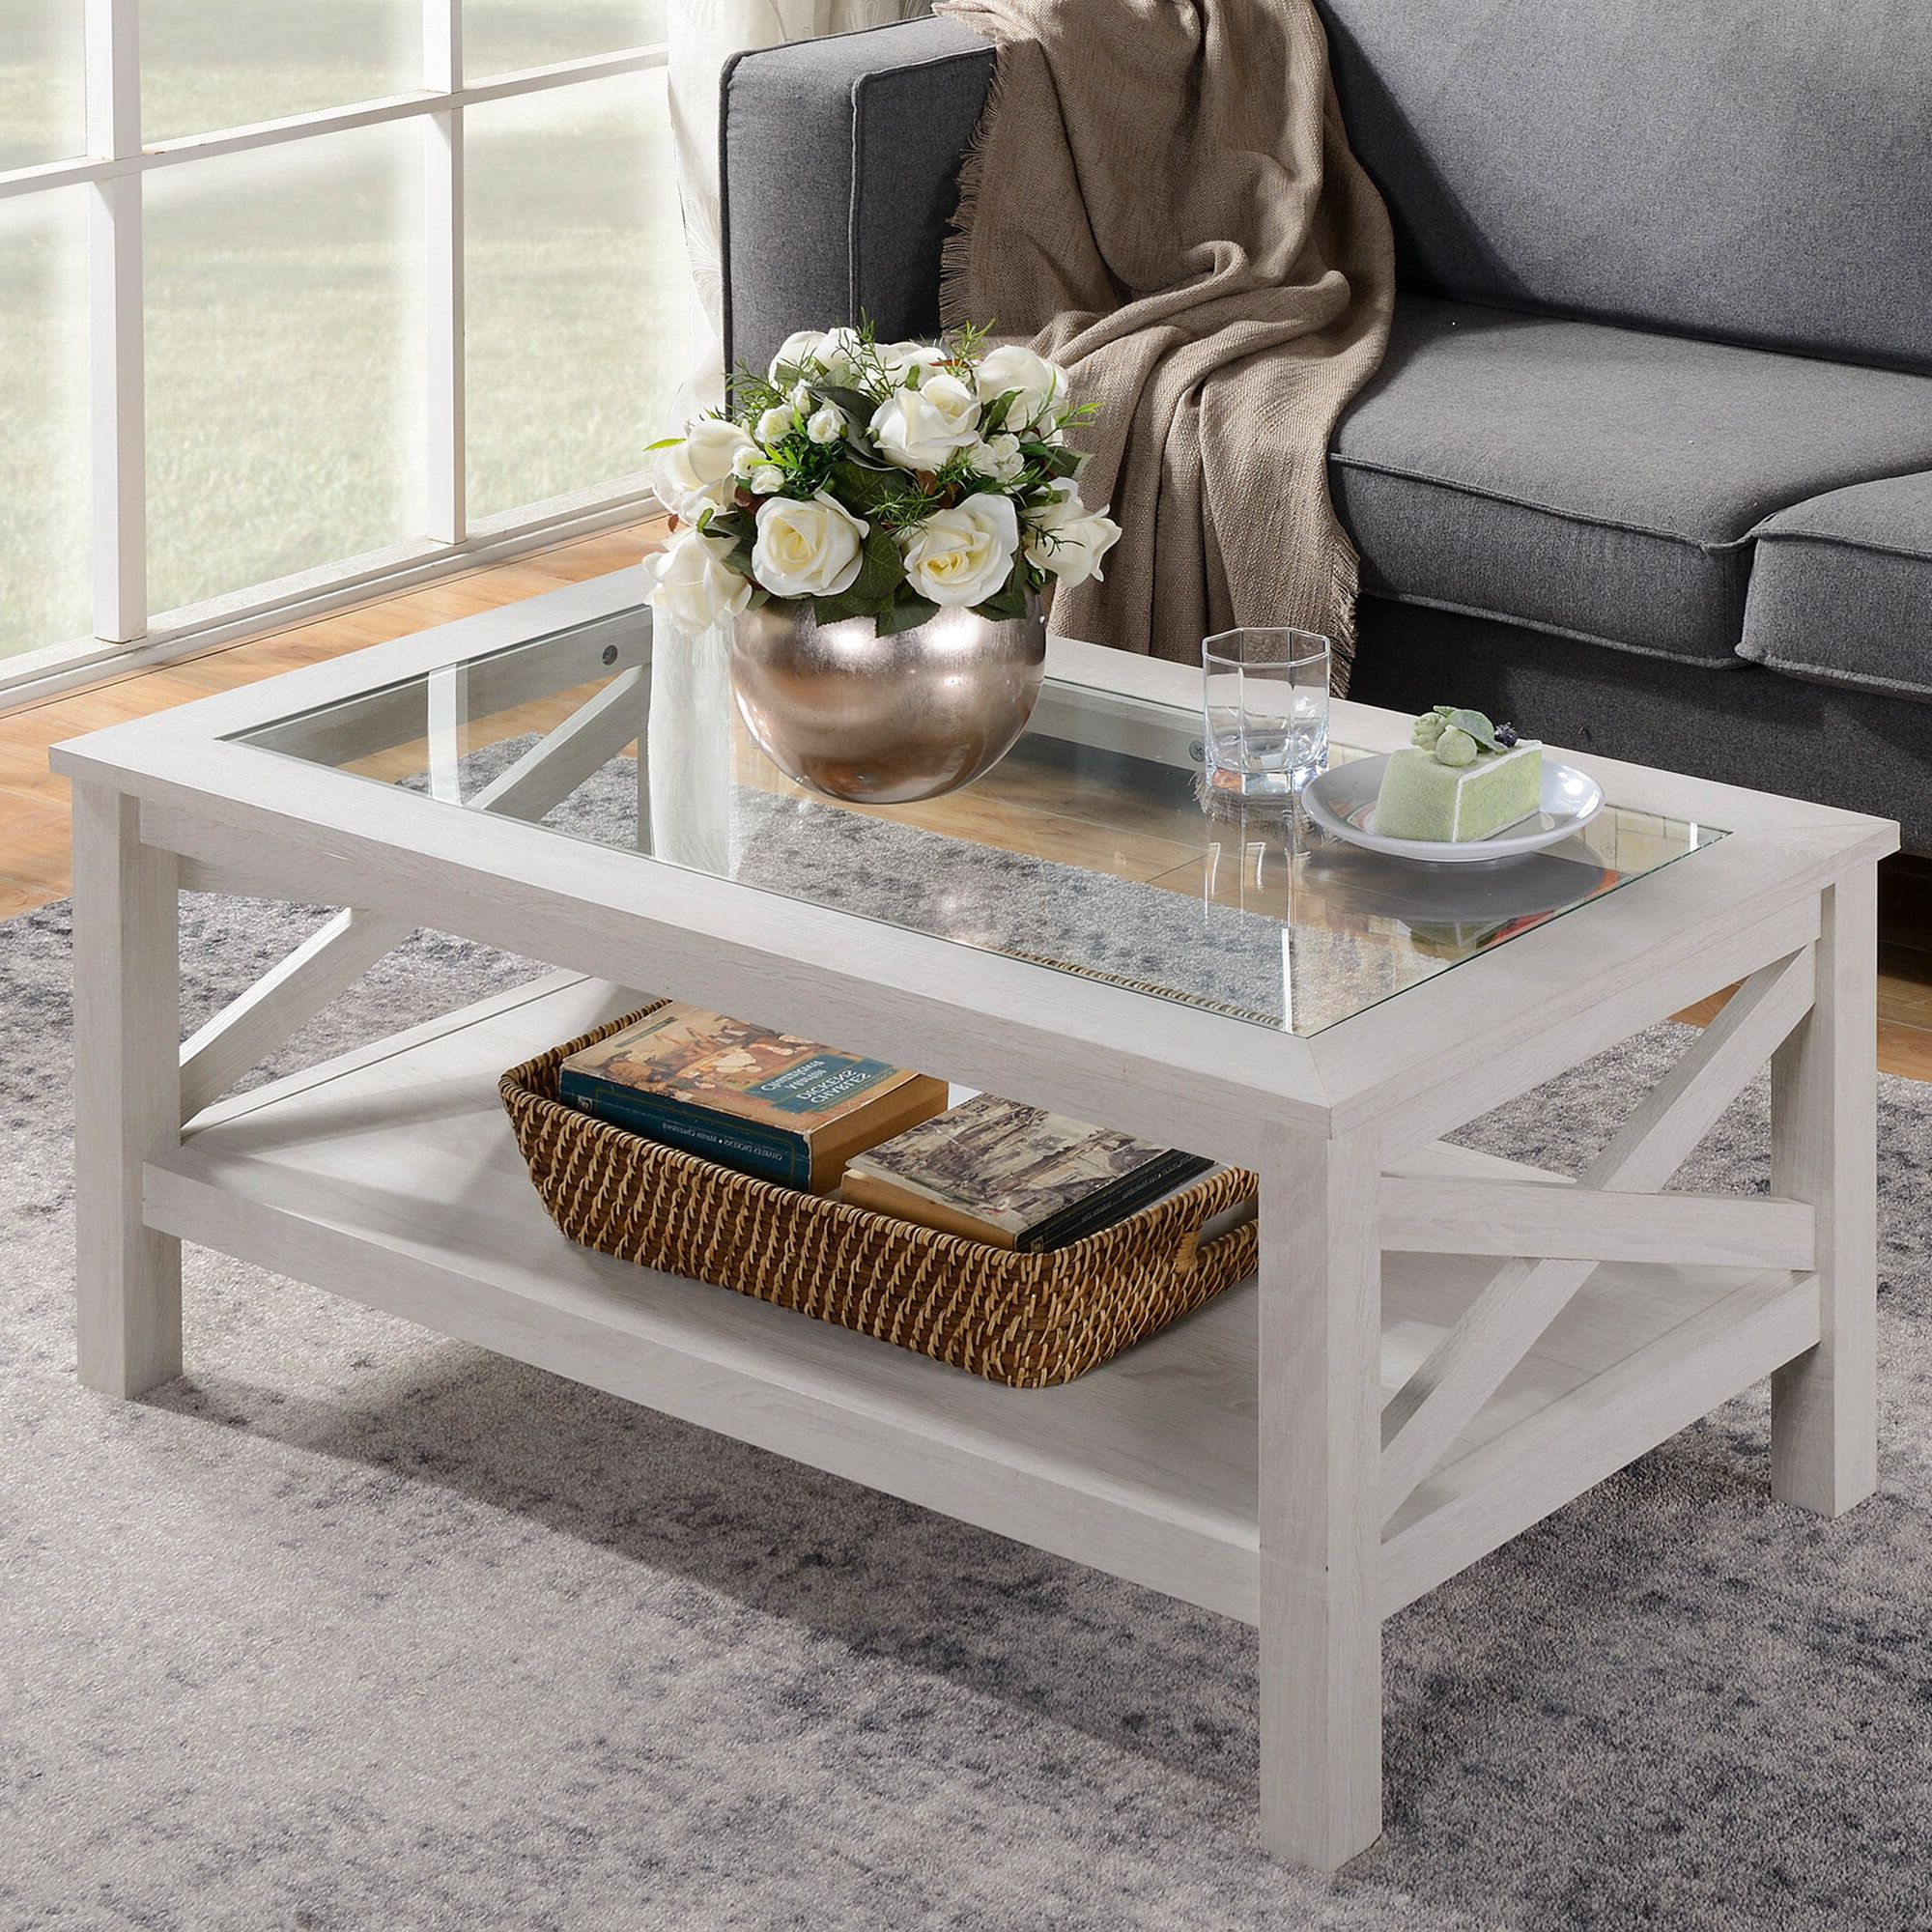 Wayfair Within Well Known Glass Tabletop Coffee Tables (View 3 of 20)